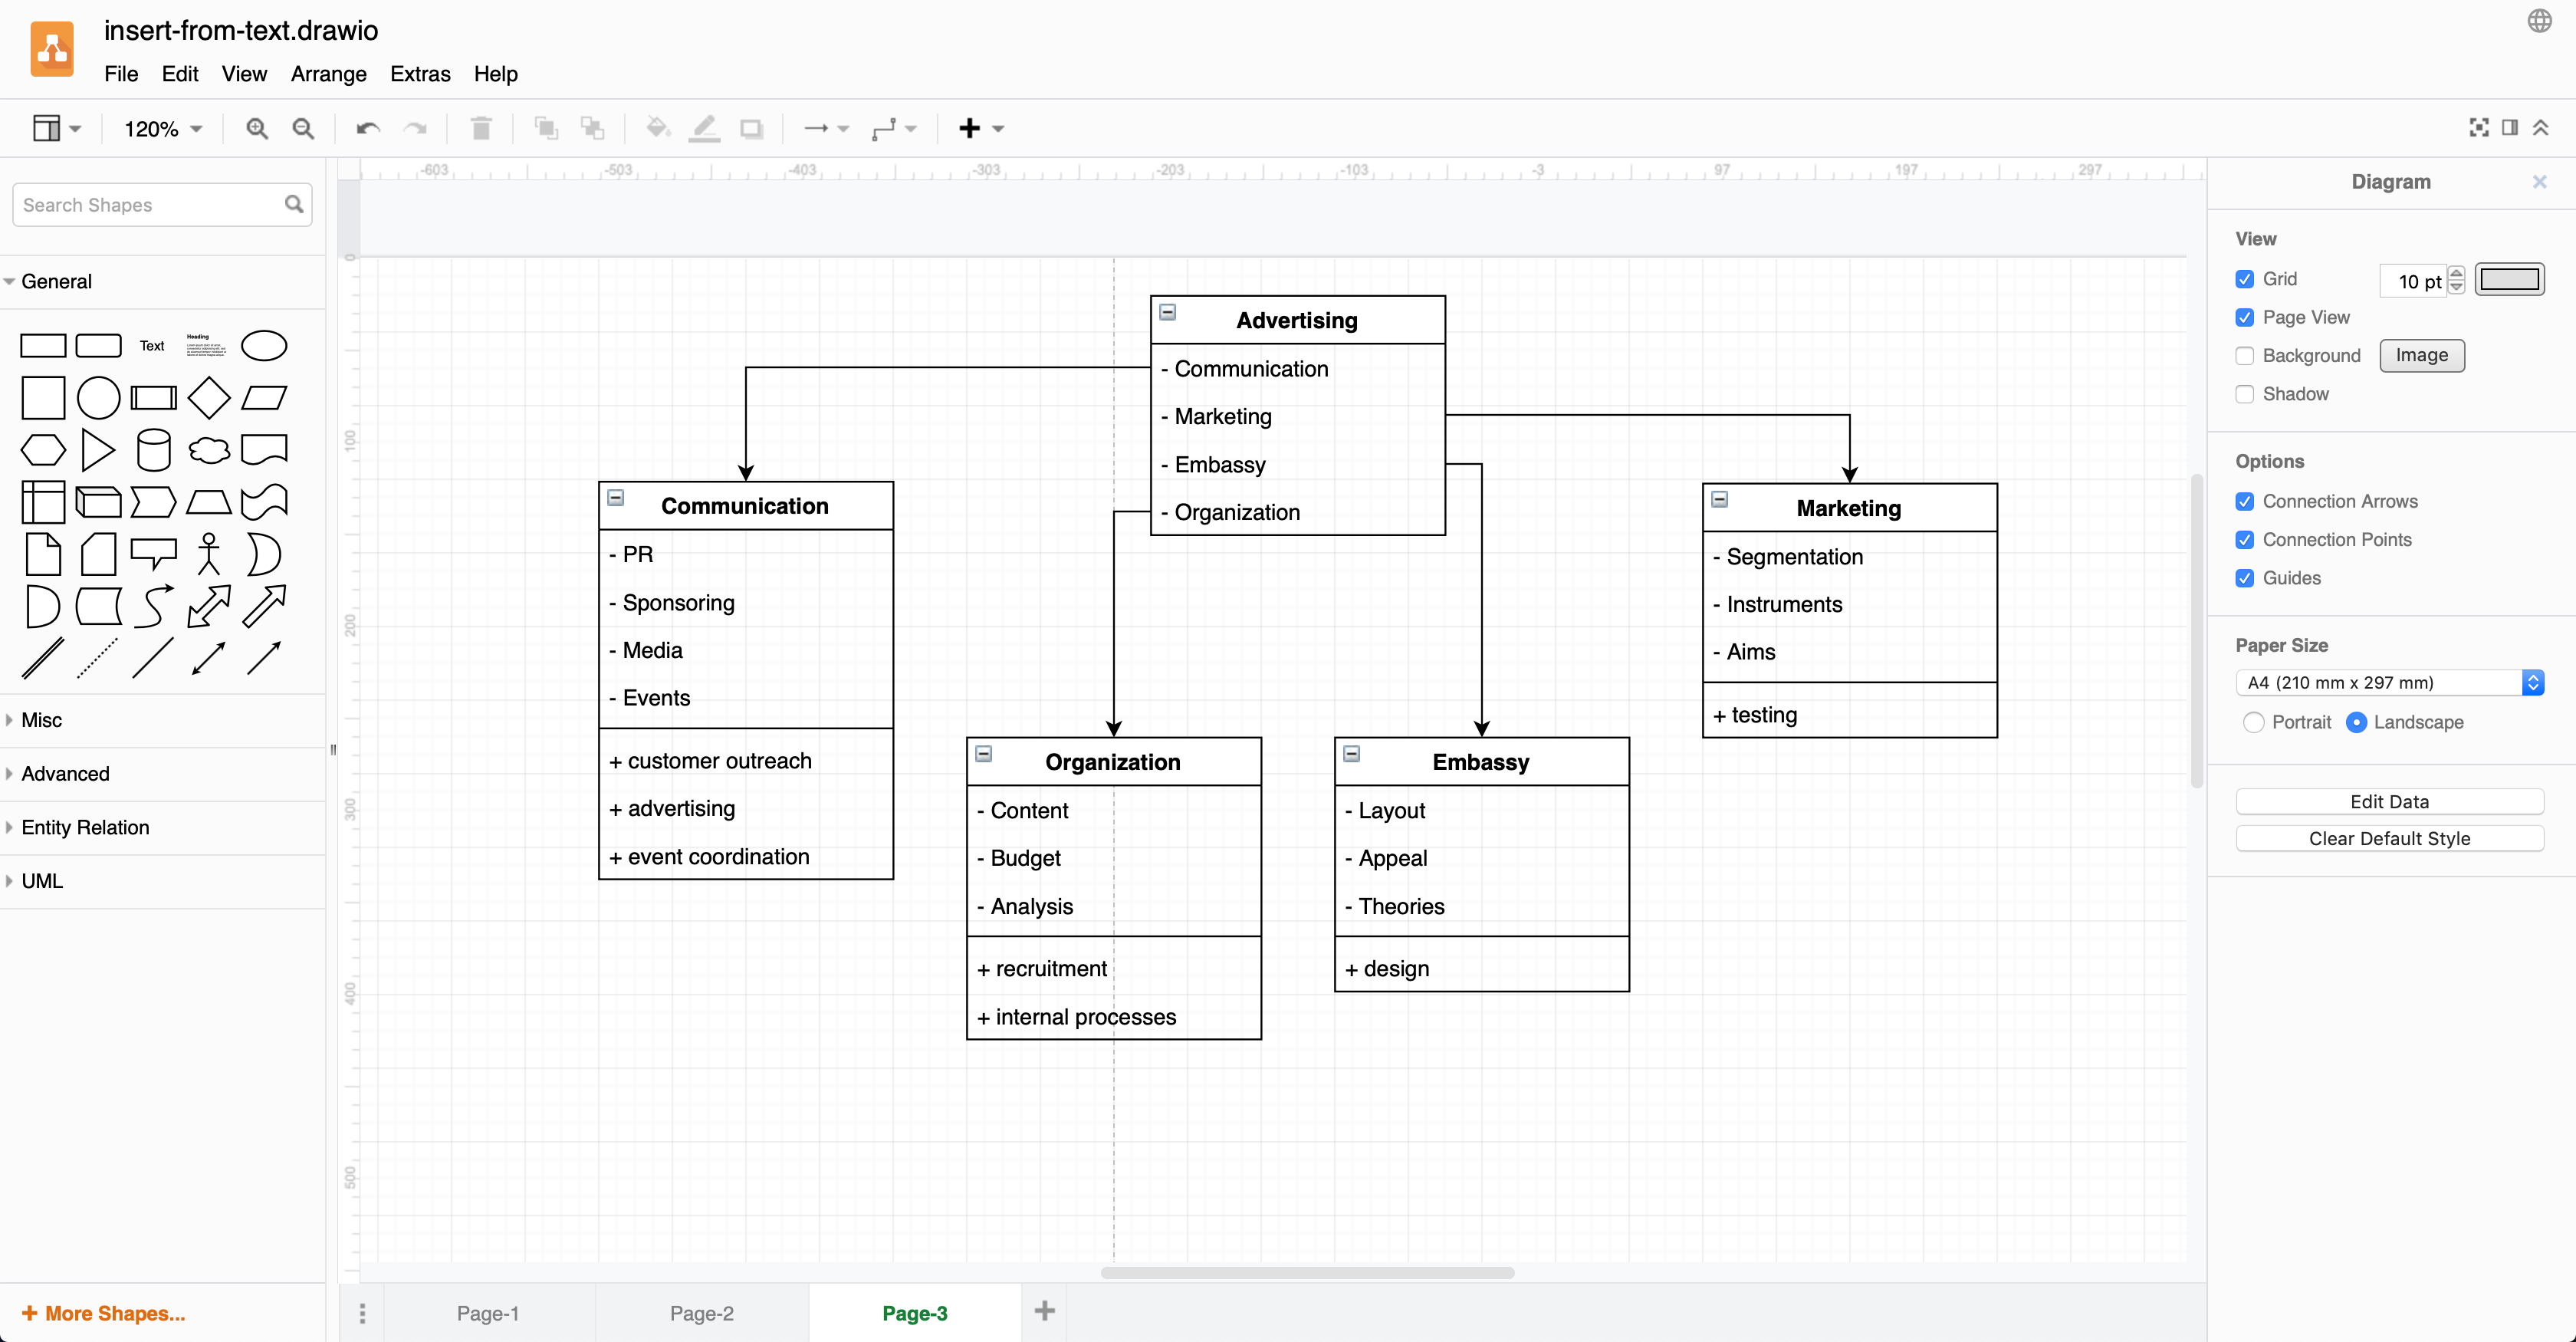 A connected entity diagram example created in draw.io